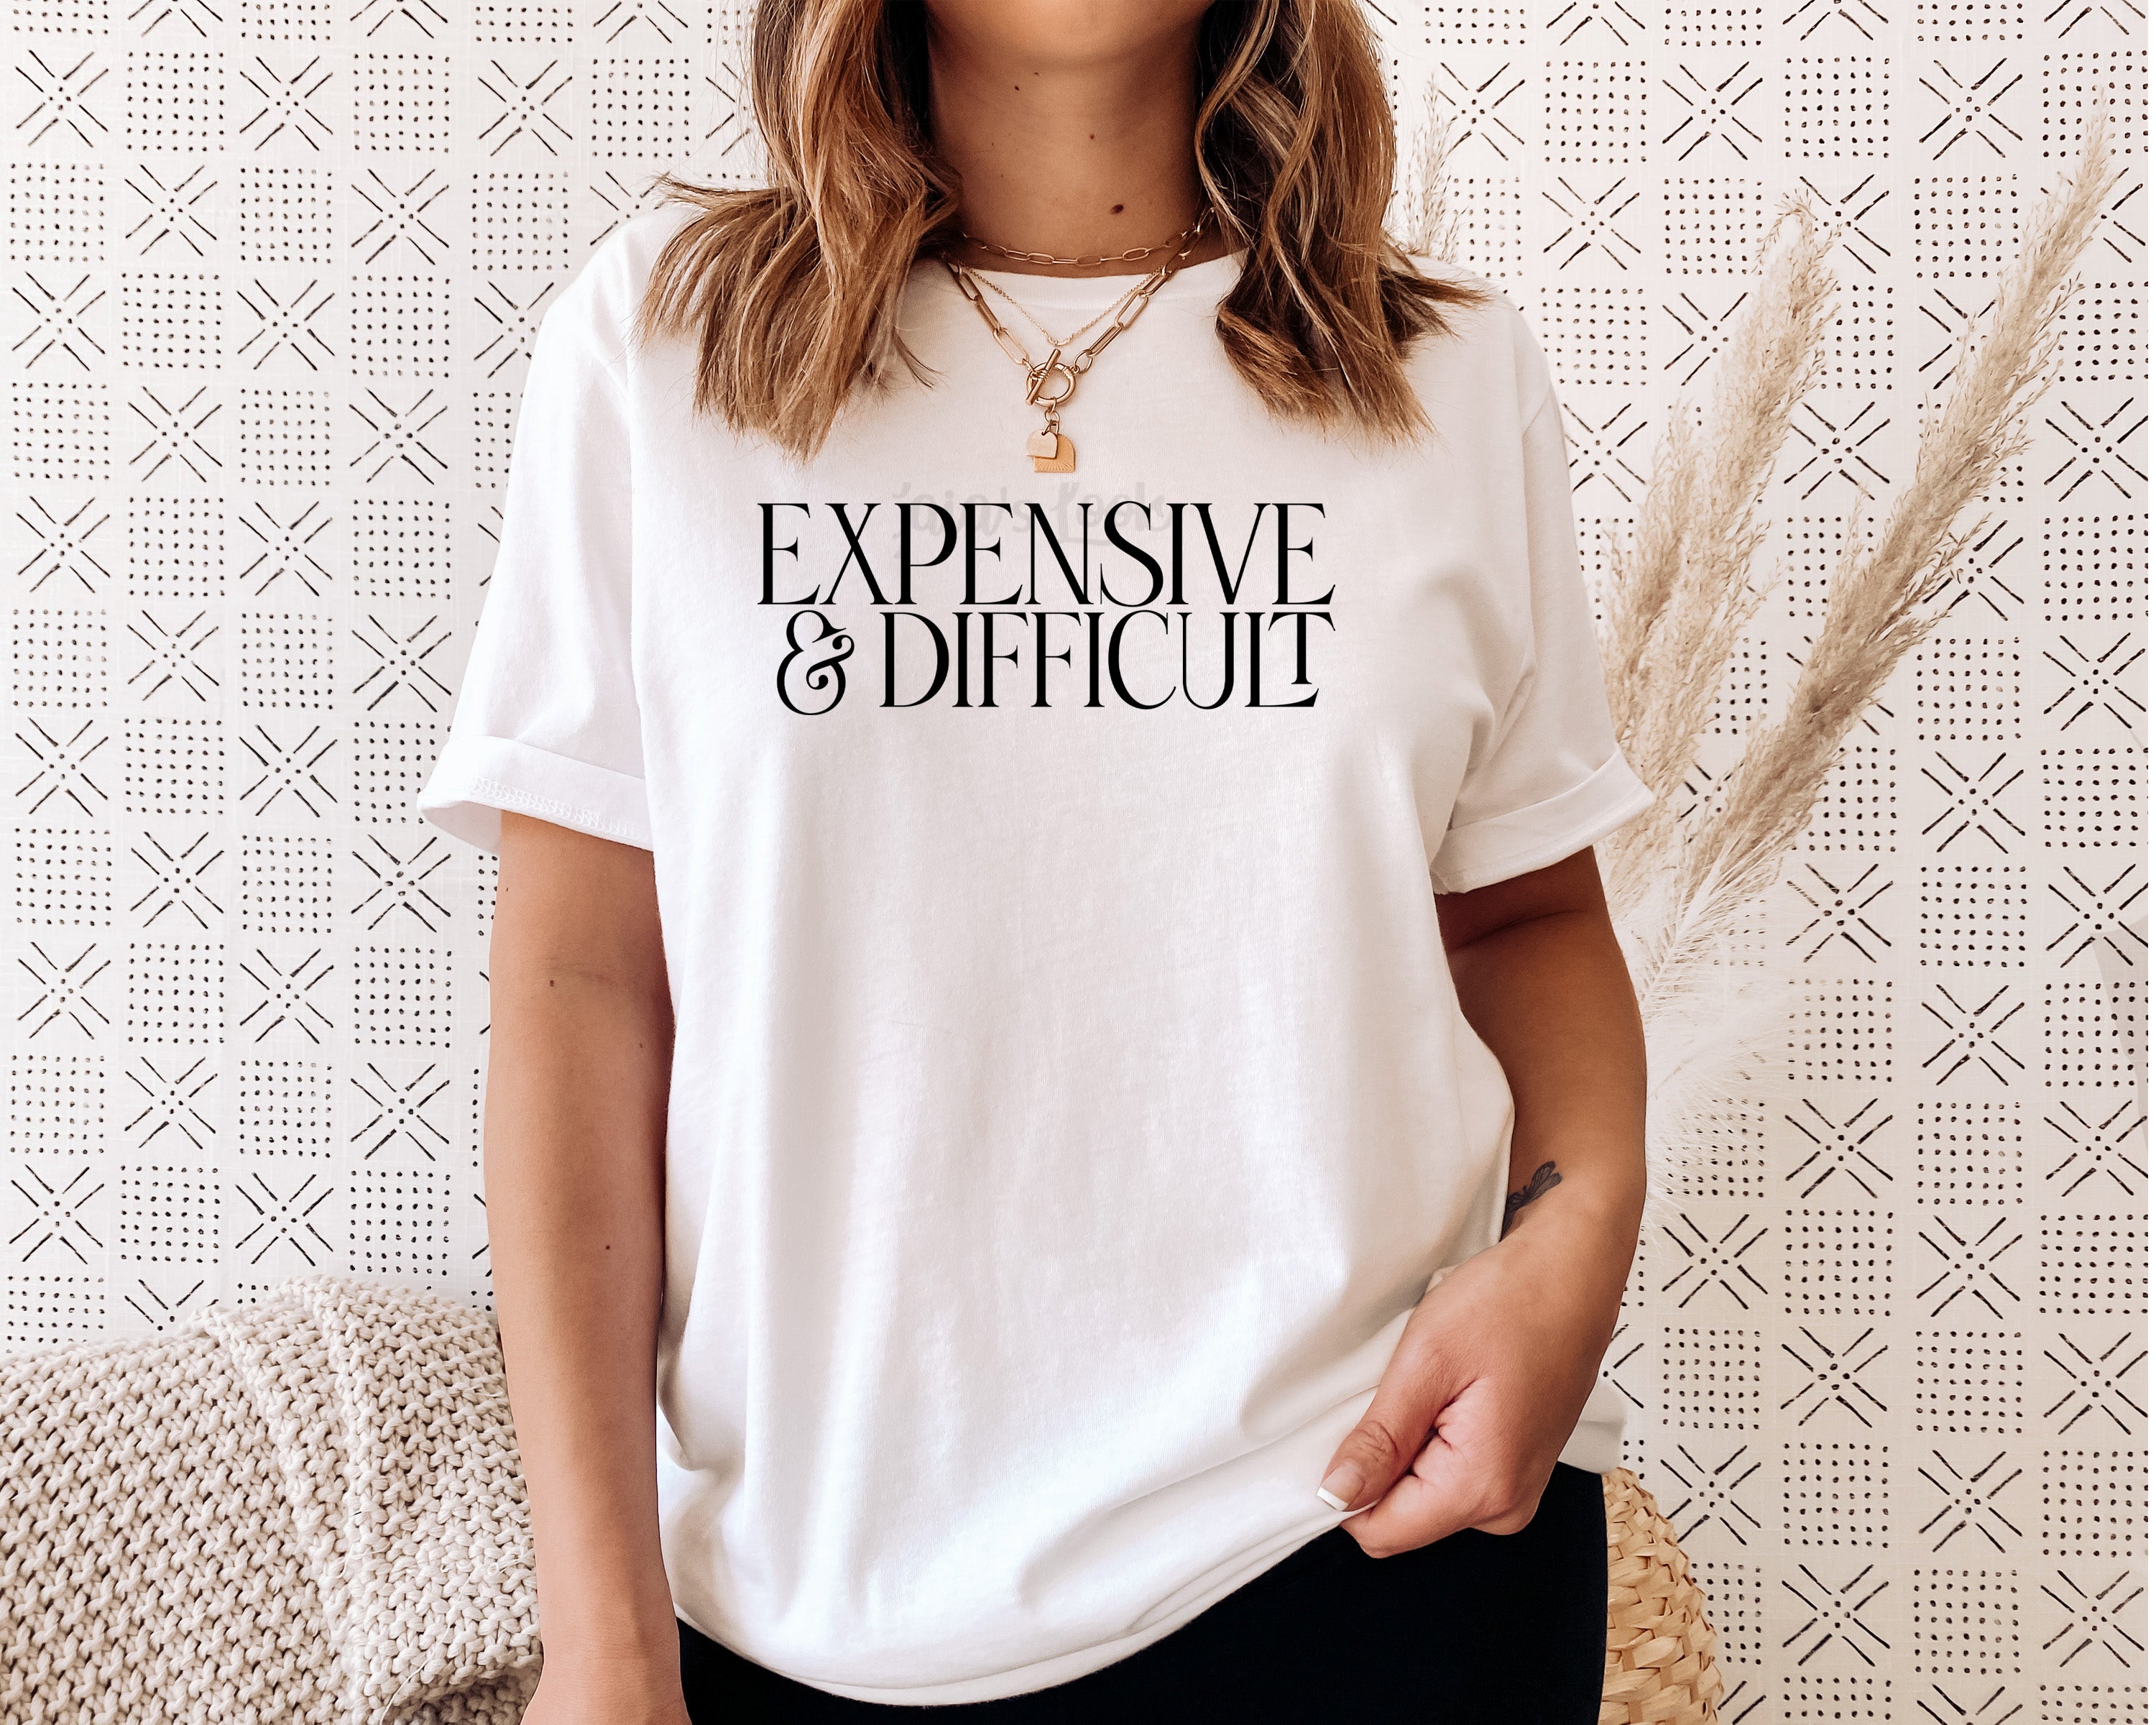 Expensive And Difficult| Sarcastic Shirt For Women